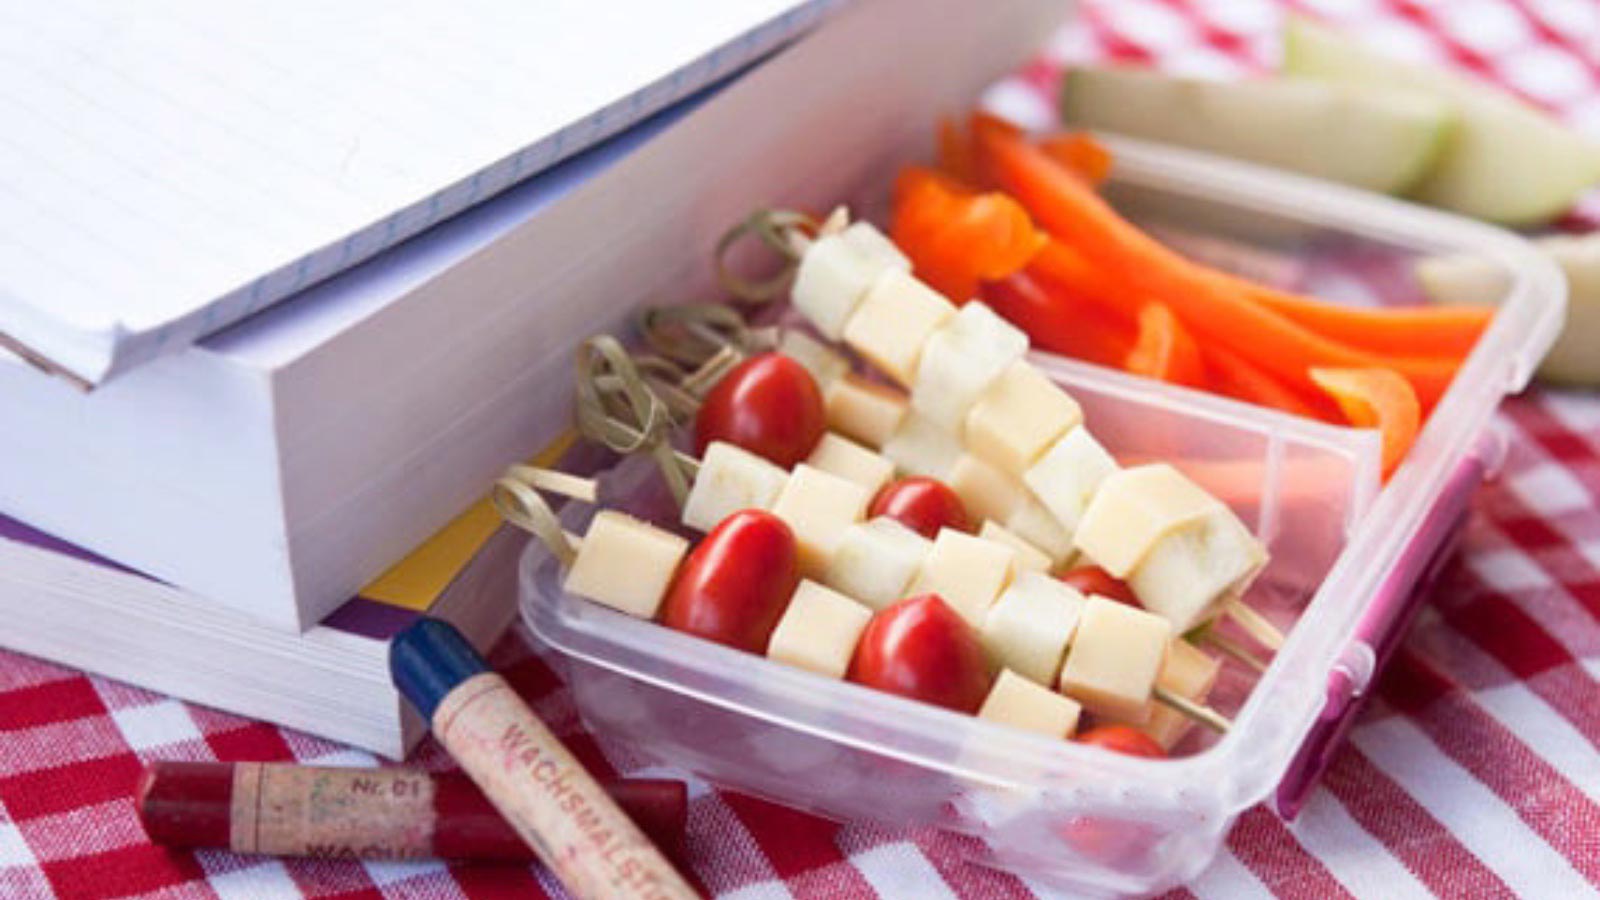 Apple & Gouda Kabobs in a small lunch container on a table next to some books.